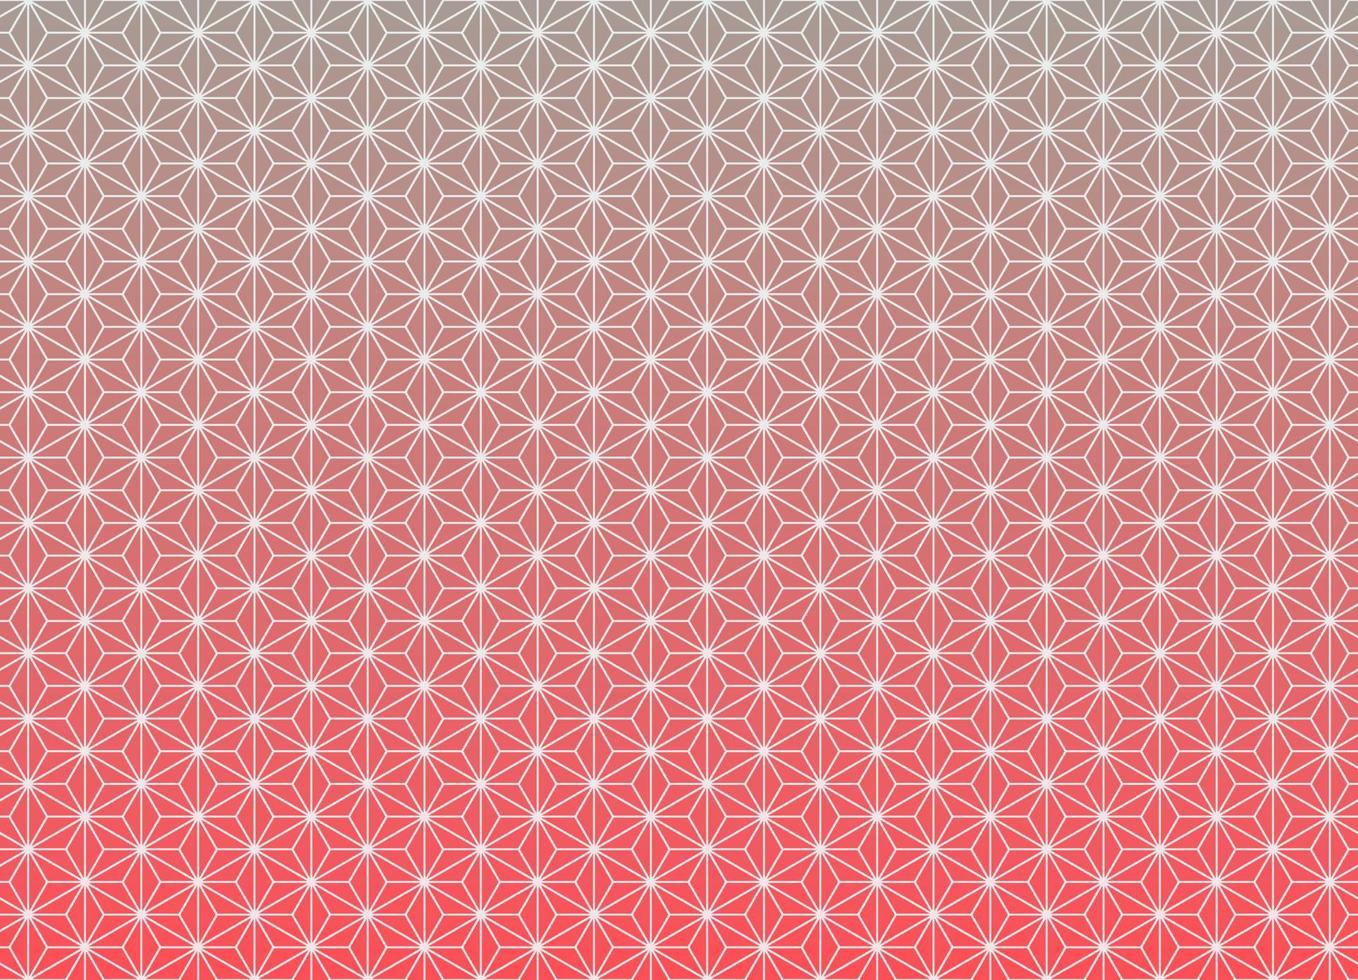 Asanoha Japanese traditional pattern with modern red gradient color background. Use for fabric, textile, cover, wrapping, decoration elements. vector